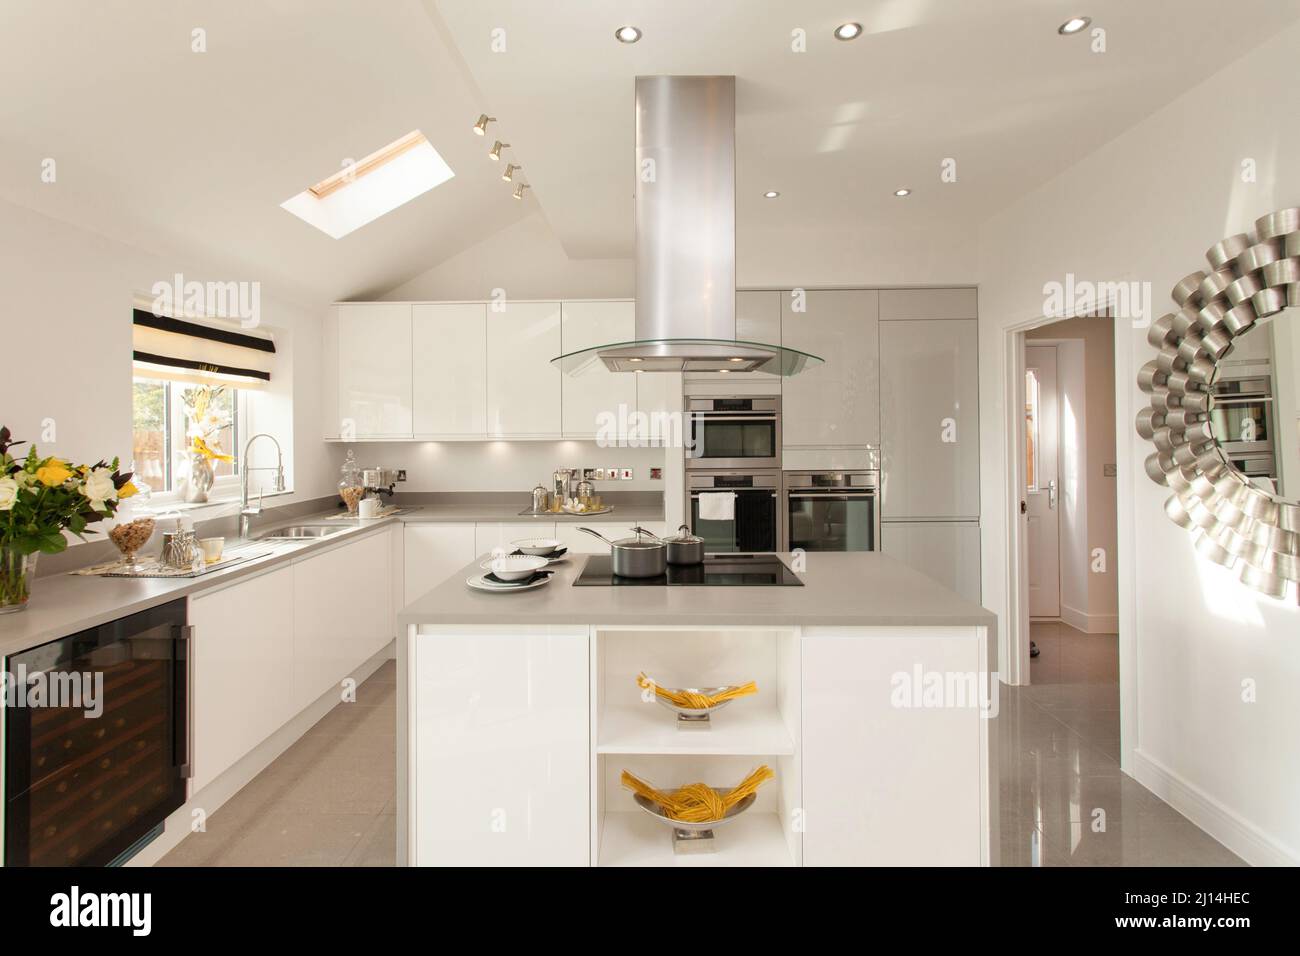 White kitchen in modern house home, centre island unit with hob and extractor hood, gloss units, tiled floor. Stock Photo